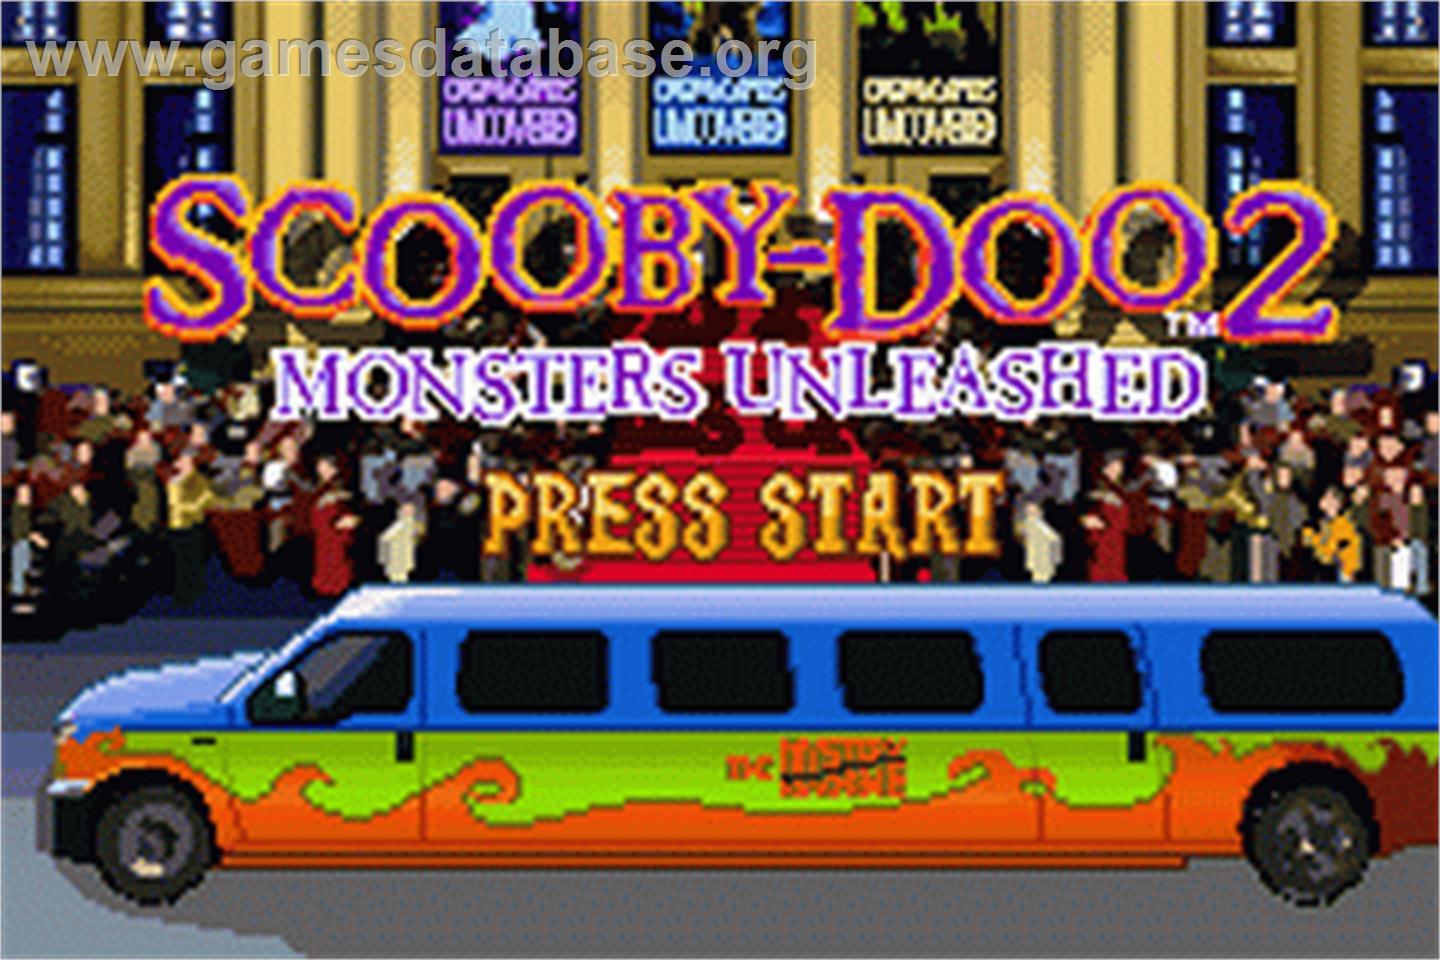 Scooby Doo 2: Monsters Unleashed - Nintendo Game Boy Advance - Artwork - Title Screen